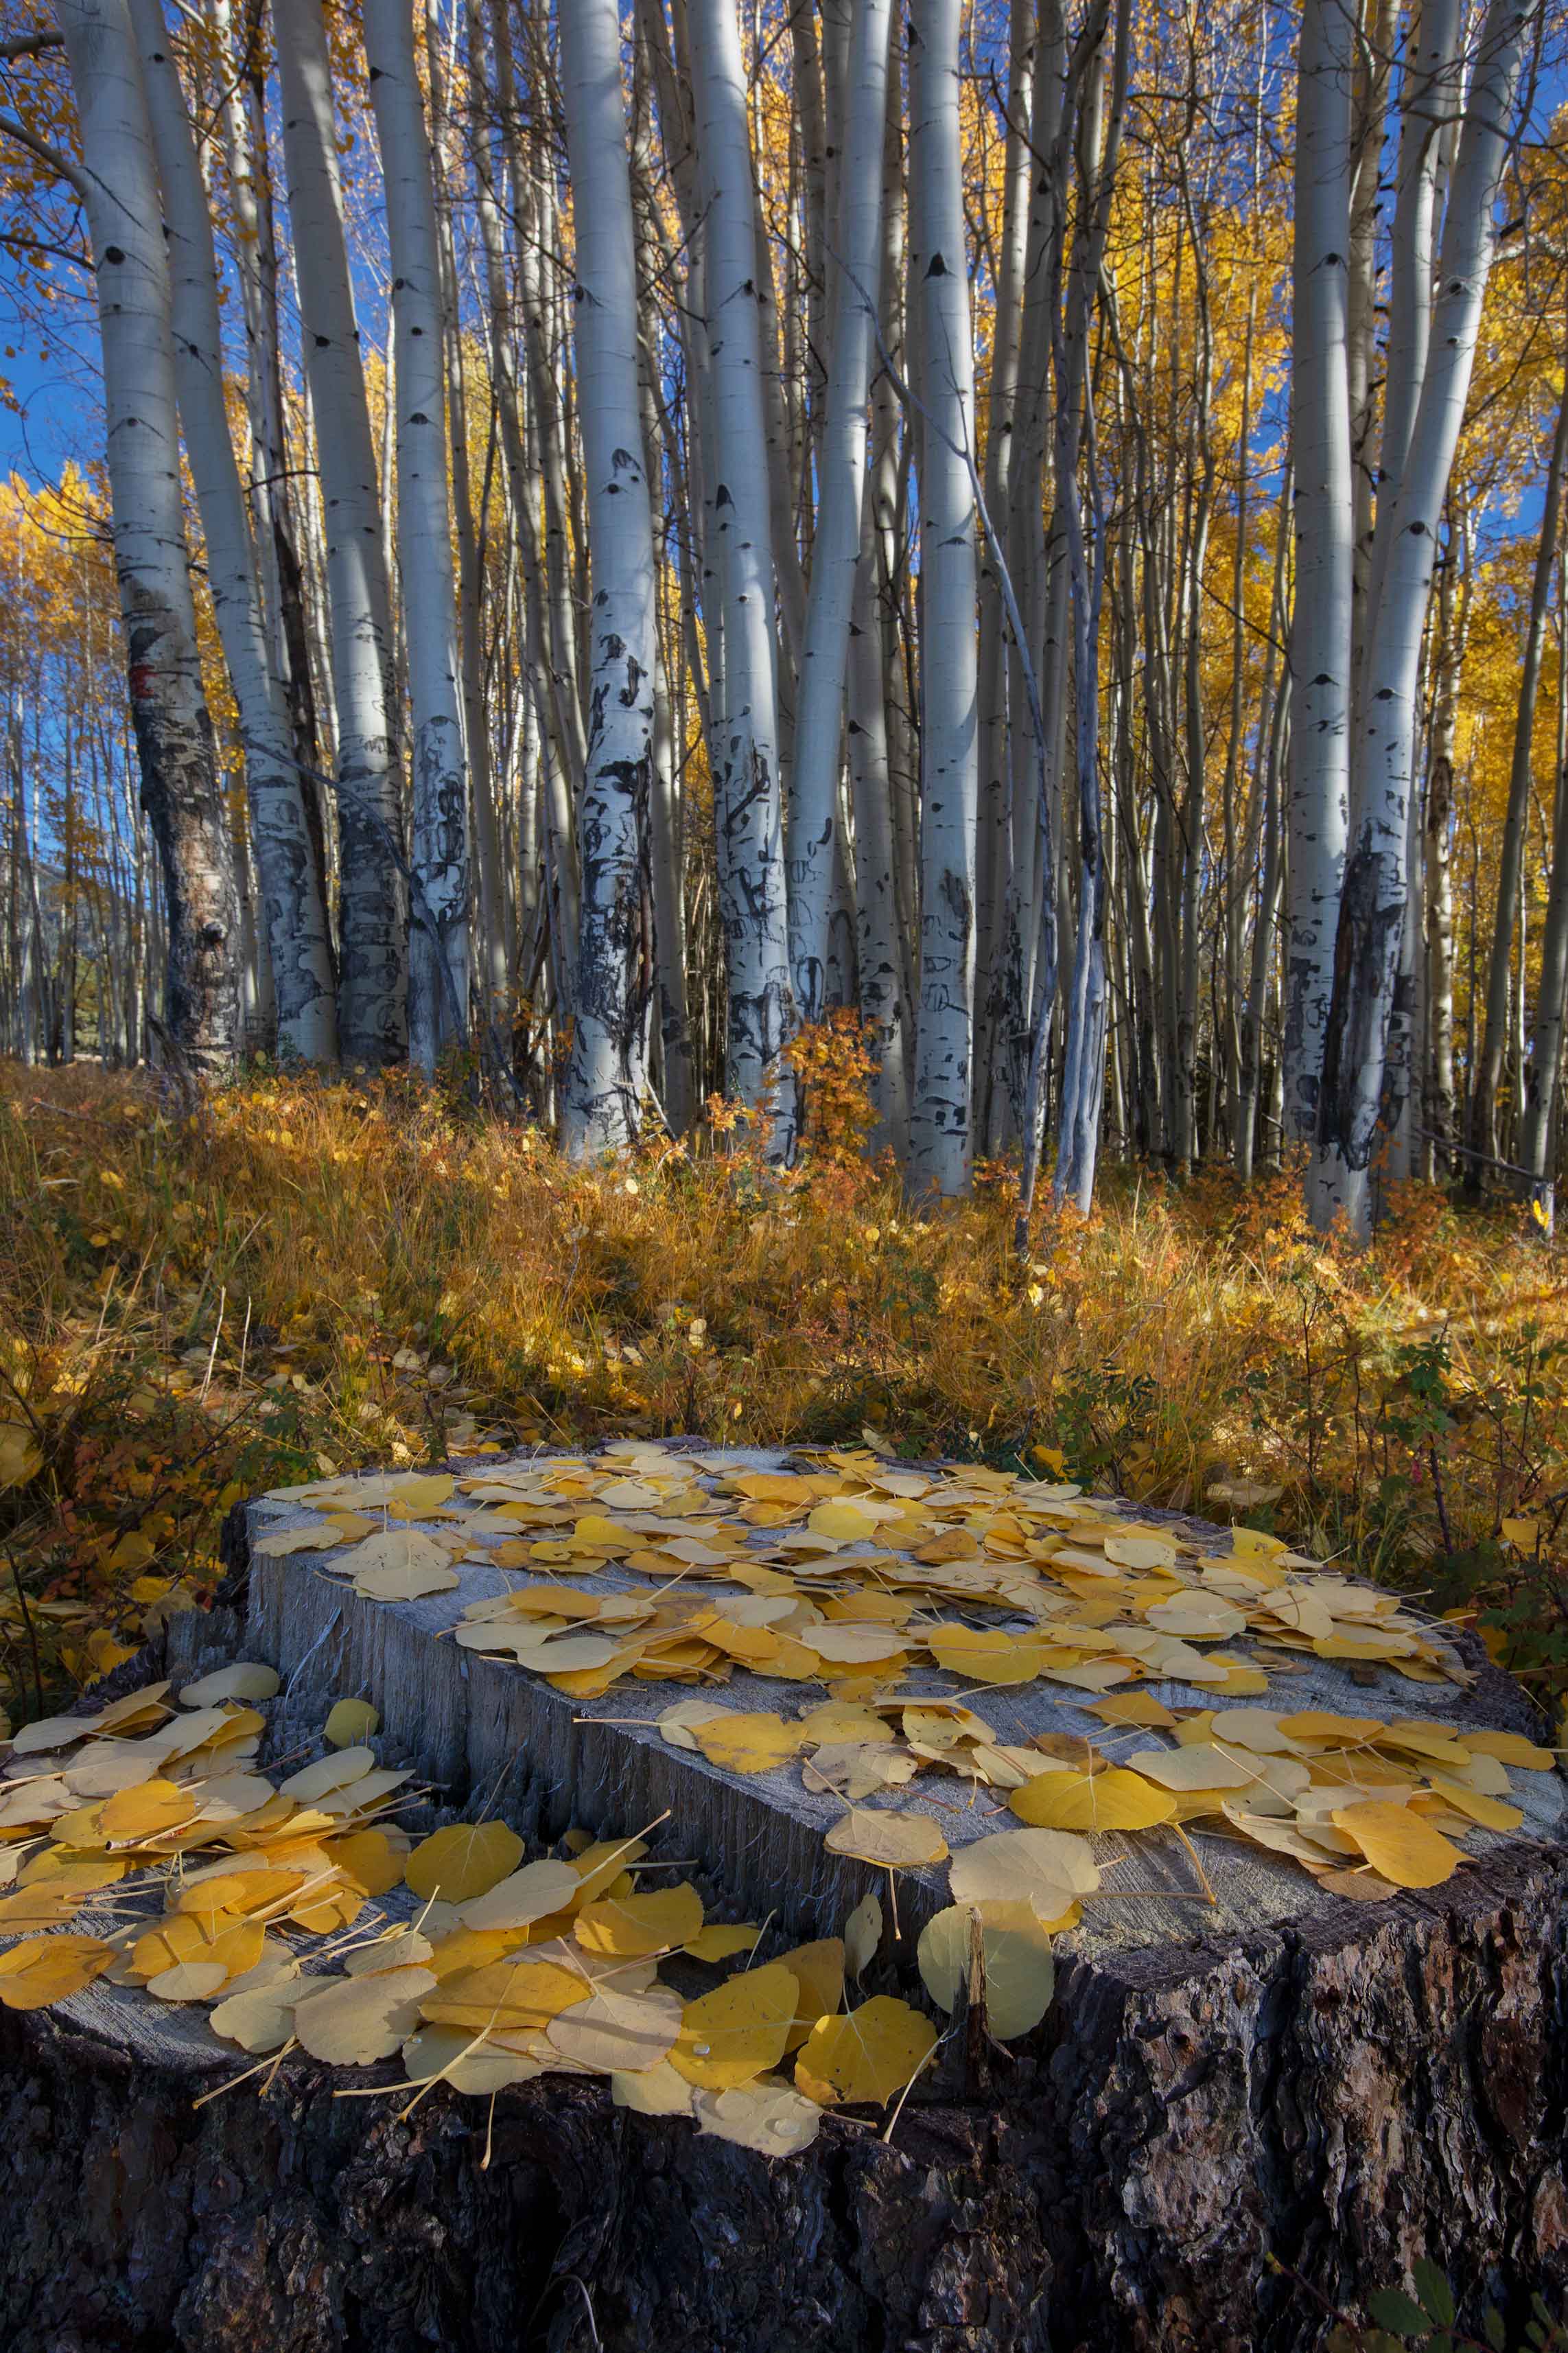 A pine stump covered in autumn aspen leaves in the San Francisco Peaks, northern Arizona